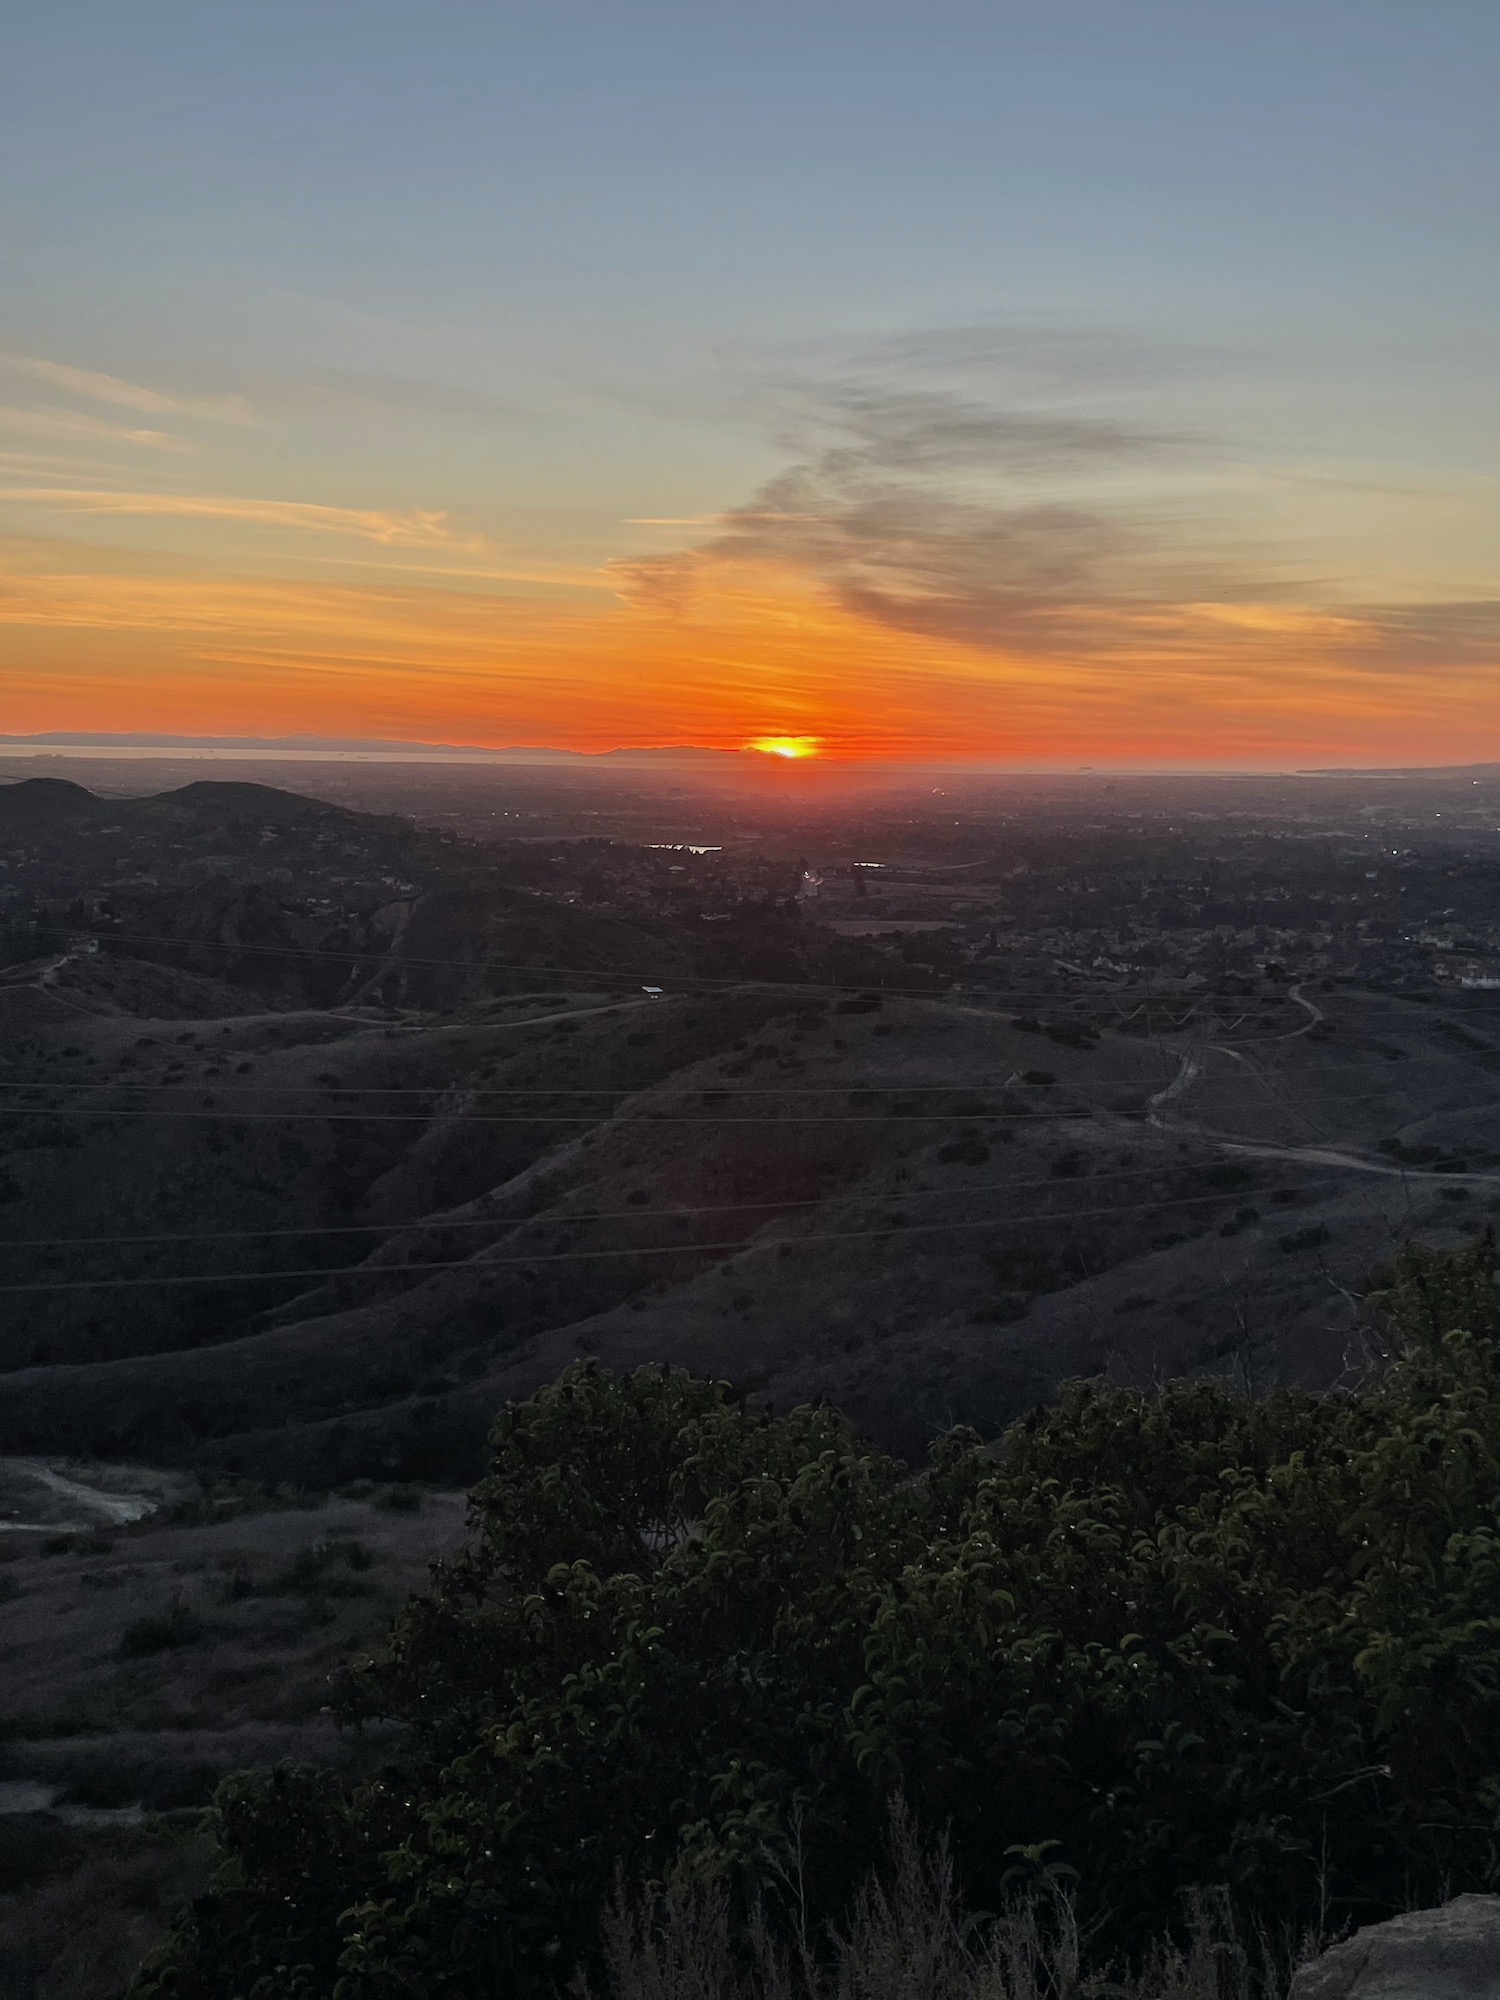 Sunset over pacific ocean - robbers roost vantage point - anaheim hills -5